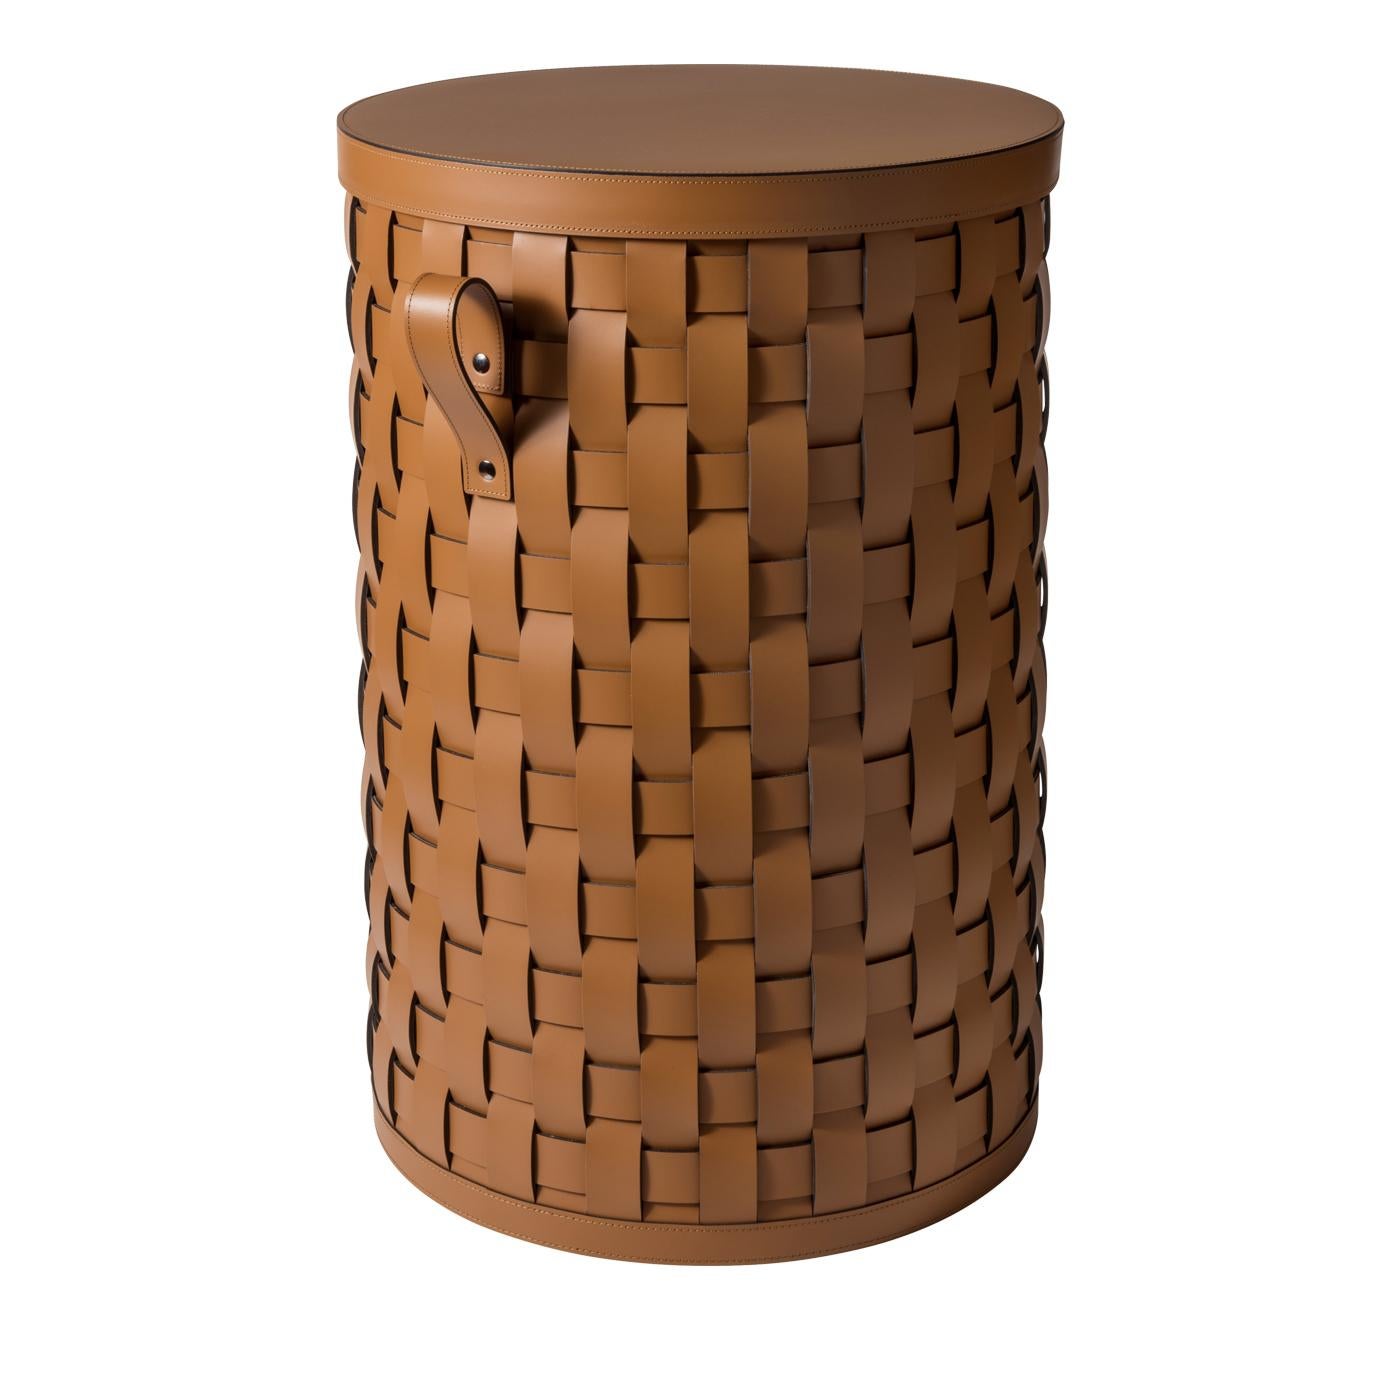 Designed and crafted exclusively by Pinetti, this striking leather basket offers a luxurious and practical solution to storage around the house. Beautifully handwoven leather strips in richly textured, tan-colored, eco-friendly leather that is